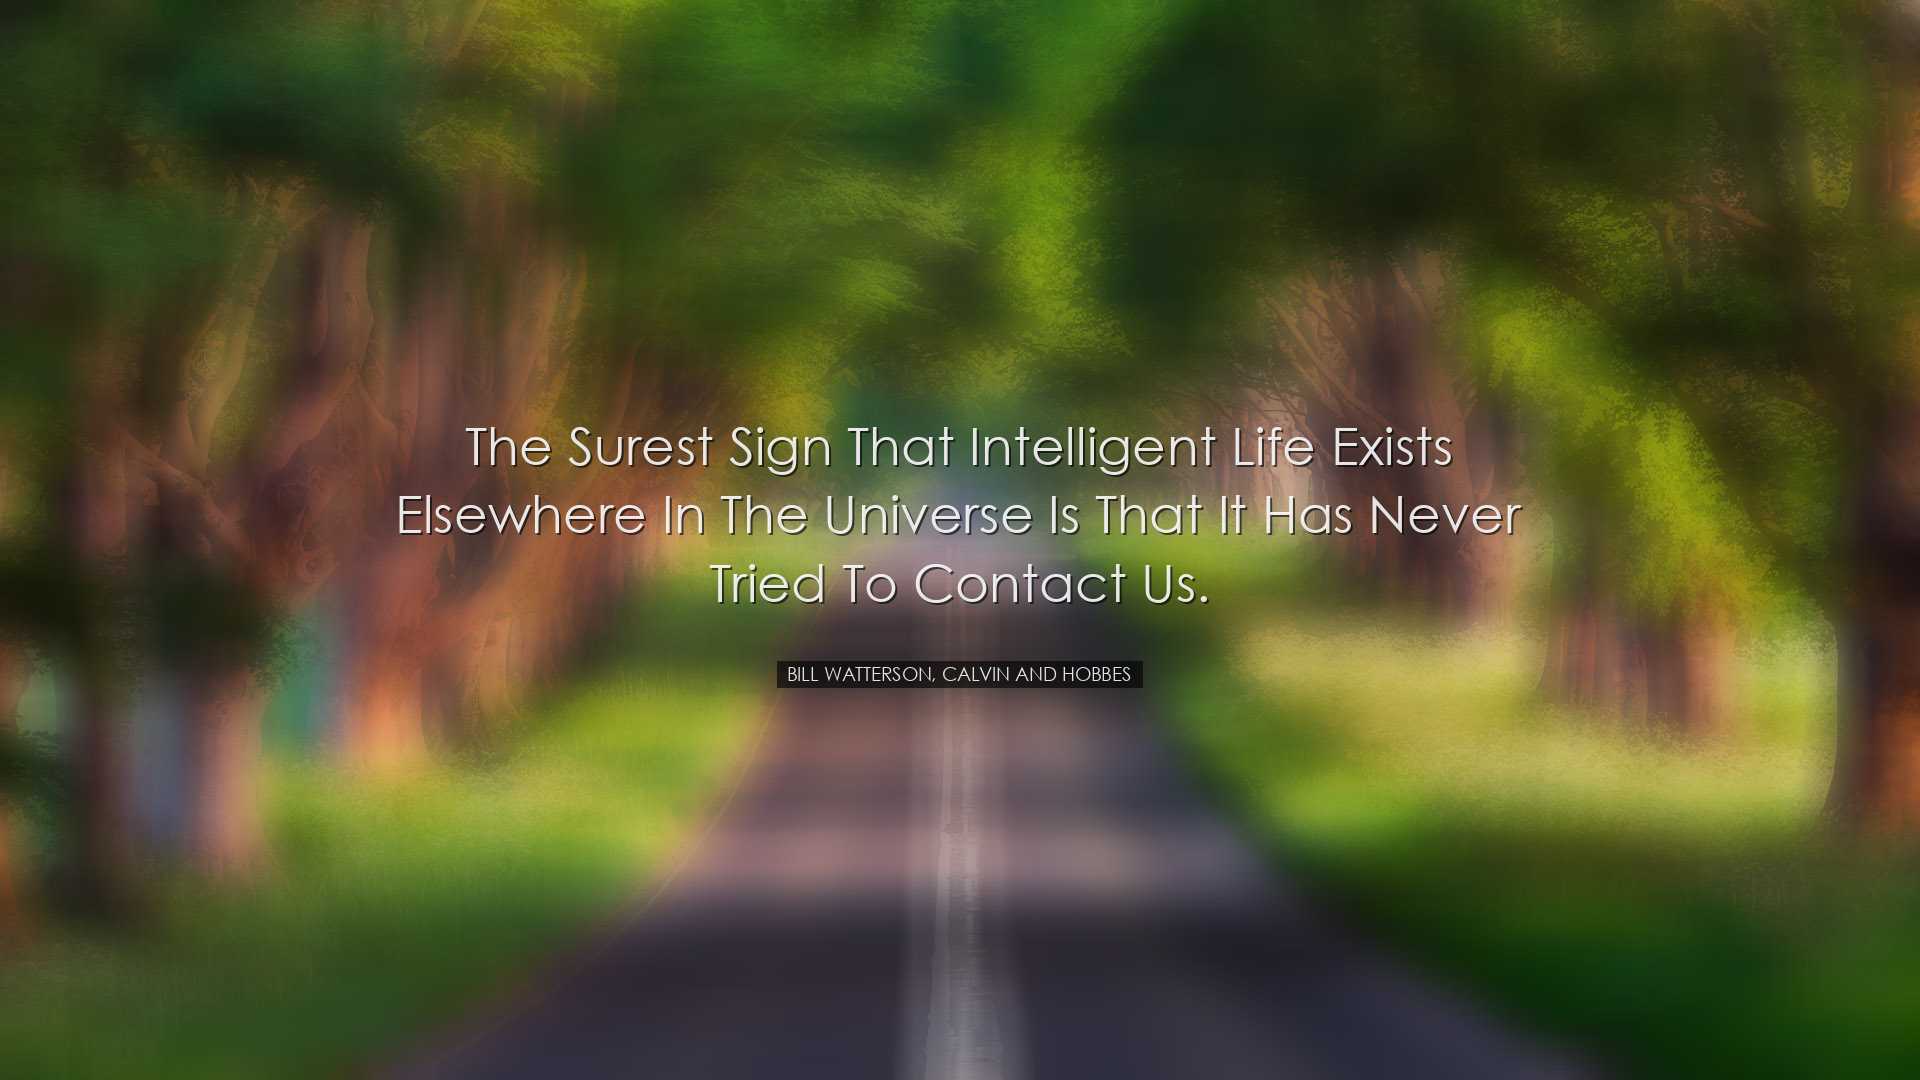 The surest sign that intelligent life exists elsewhere in the univ